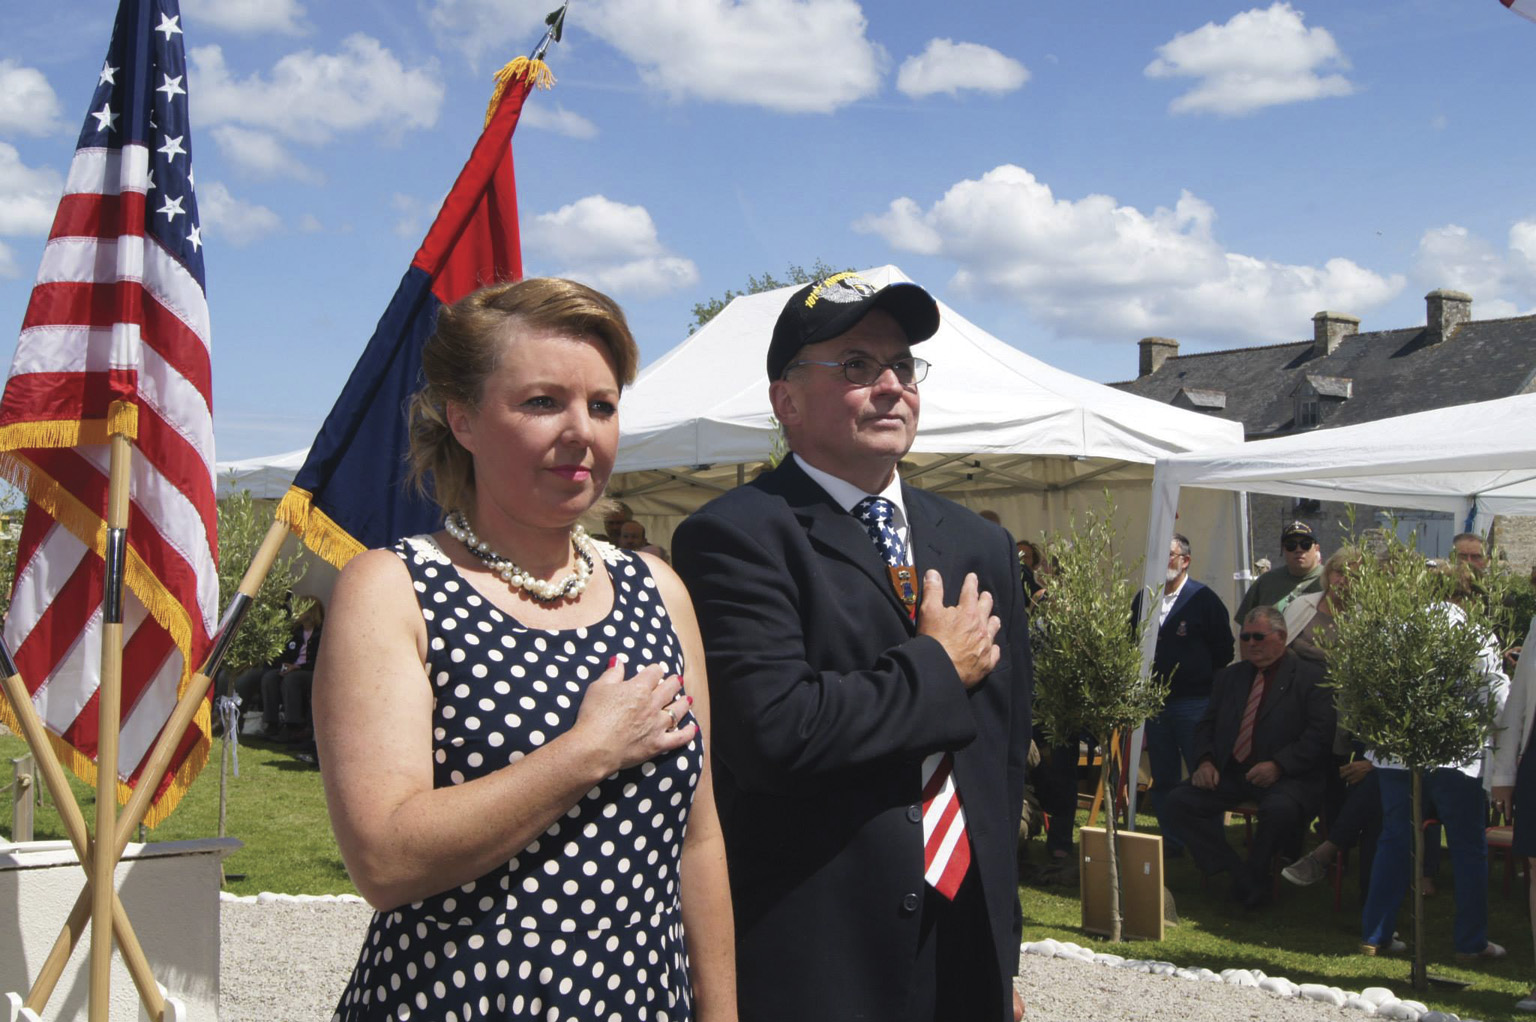 David Ashe and his partner, Céline Schwab Lautour, organize the annual ceremony at the Ravenoville Eternal Heroes Memorial. Ashe, the founder of the monument, believes in peace and reconciliation and flies both the U.S. and German flags.